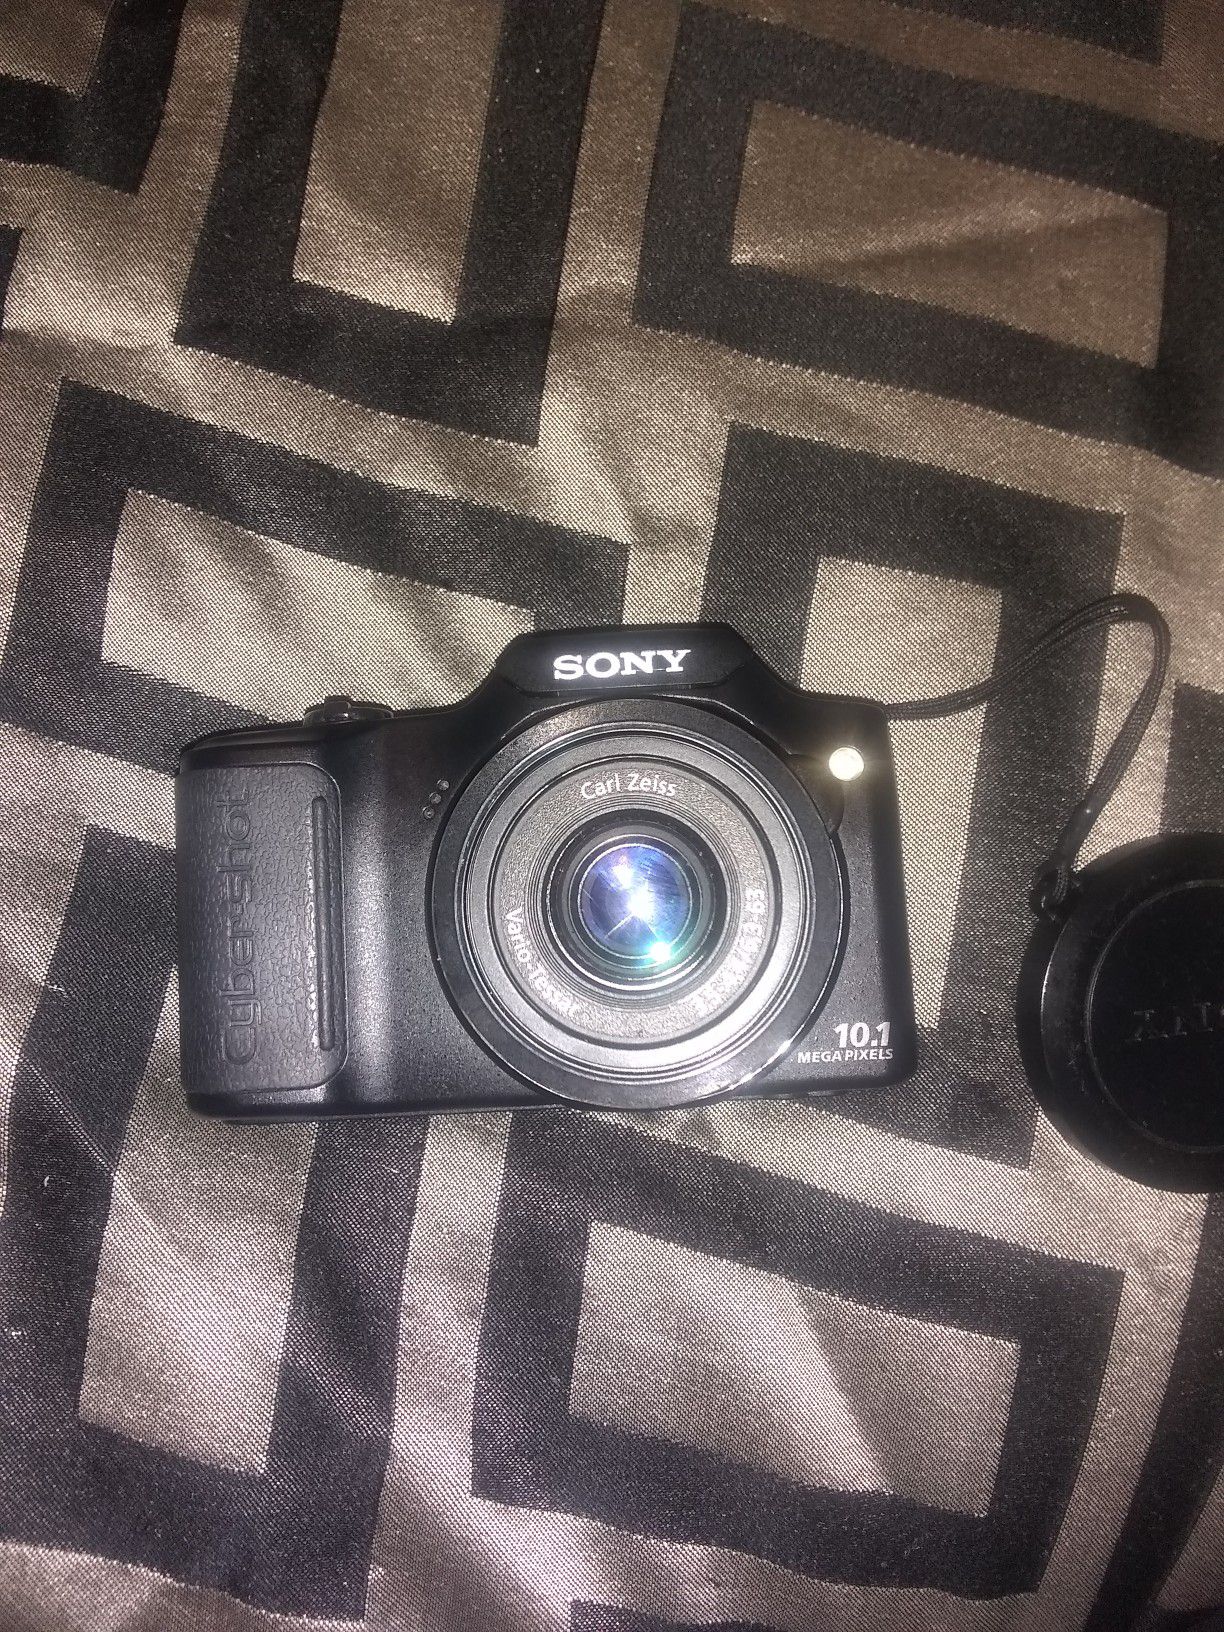 Sony camera great shape needs a charger